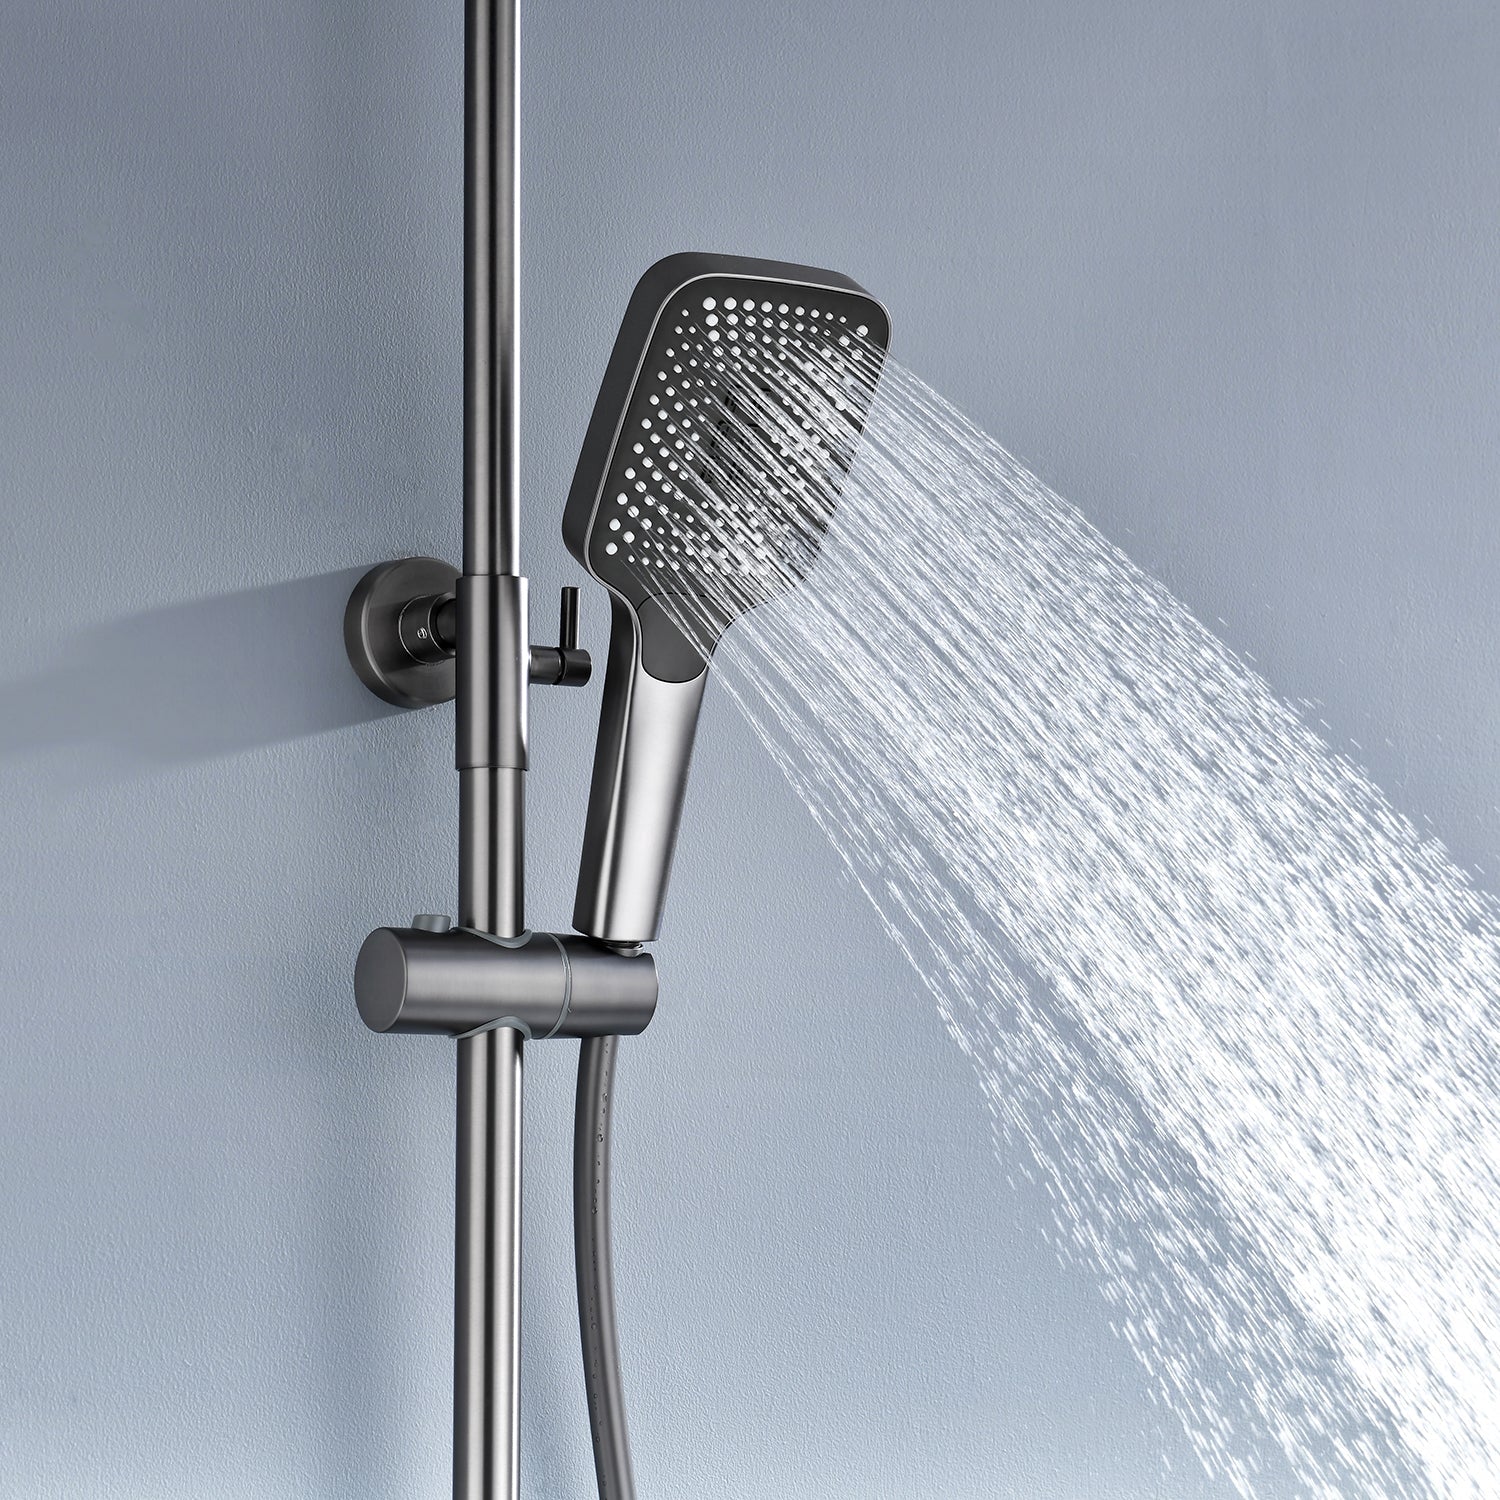 Lefton Thermostatic Shower System With 4 Independent Buttons And 4 Water Outlet Modes SS2201 -Shower Systems- Lefton Home